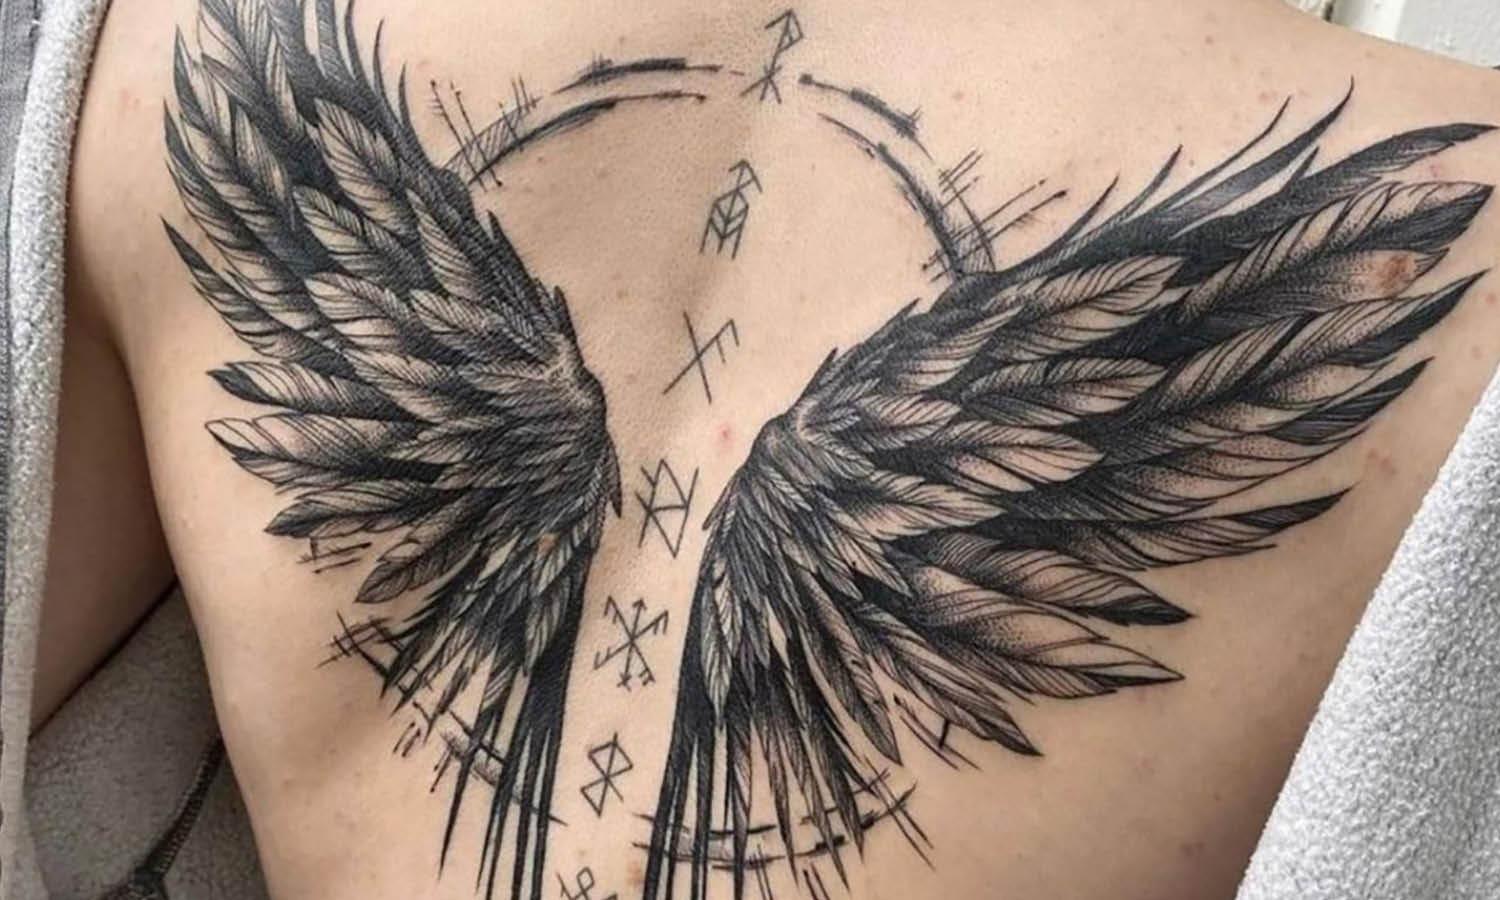 101 Best Wings Back Tattoo Ideas That Will Blow Your Mind!